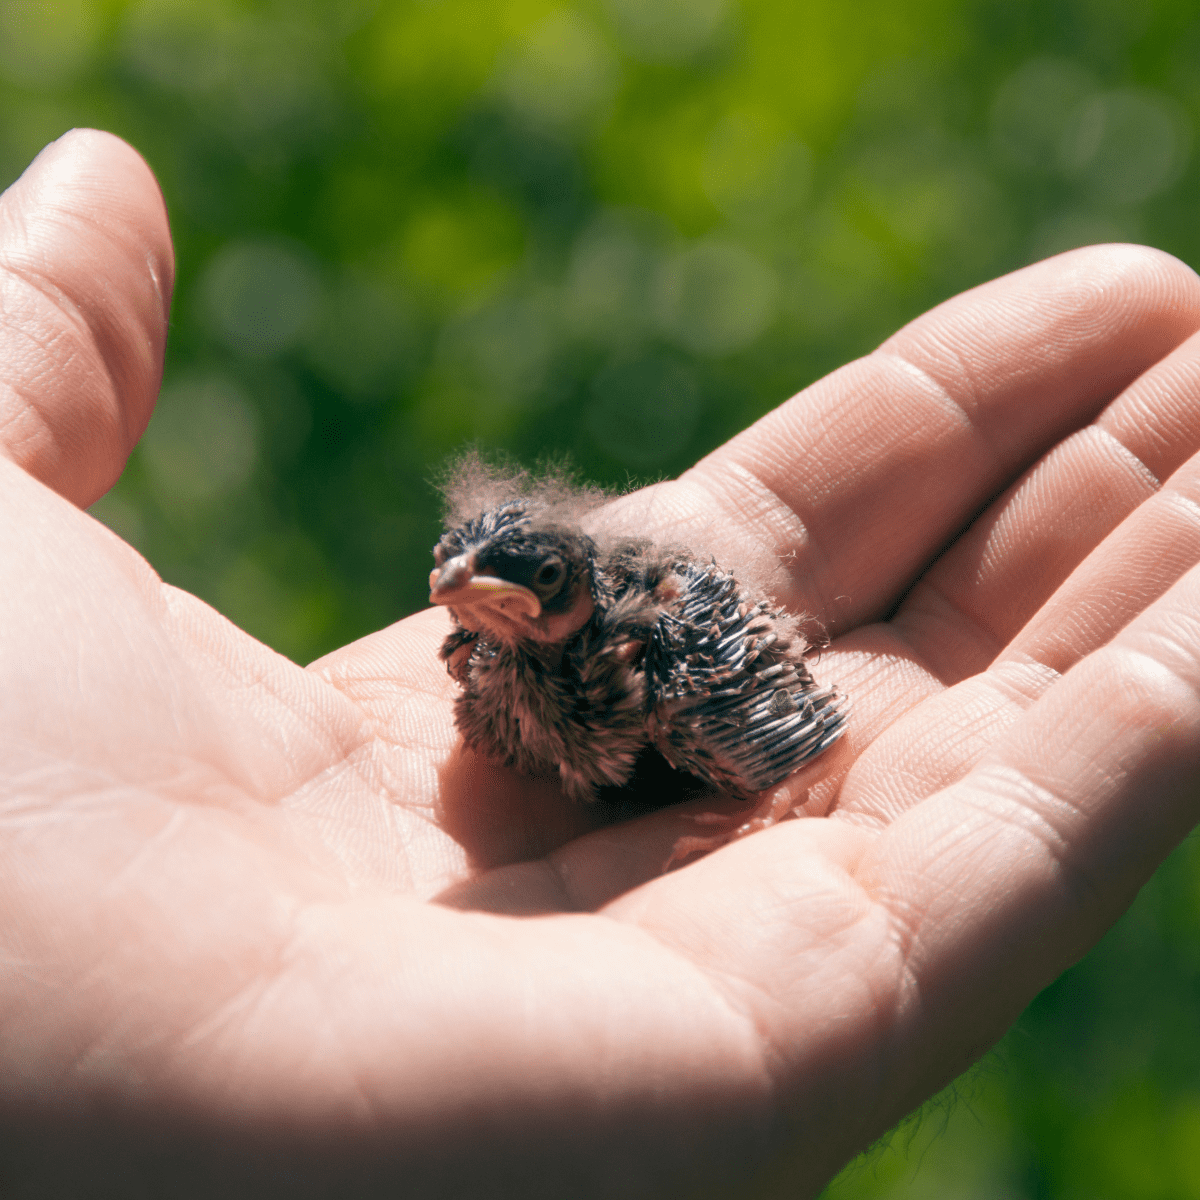 Think twice before 'rescuing' young wildlife